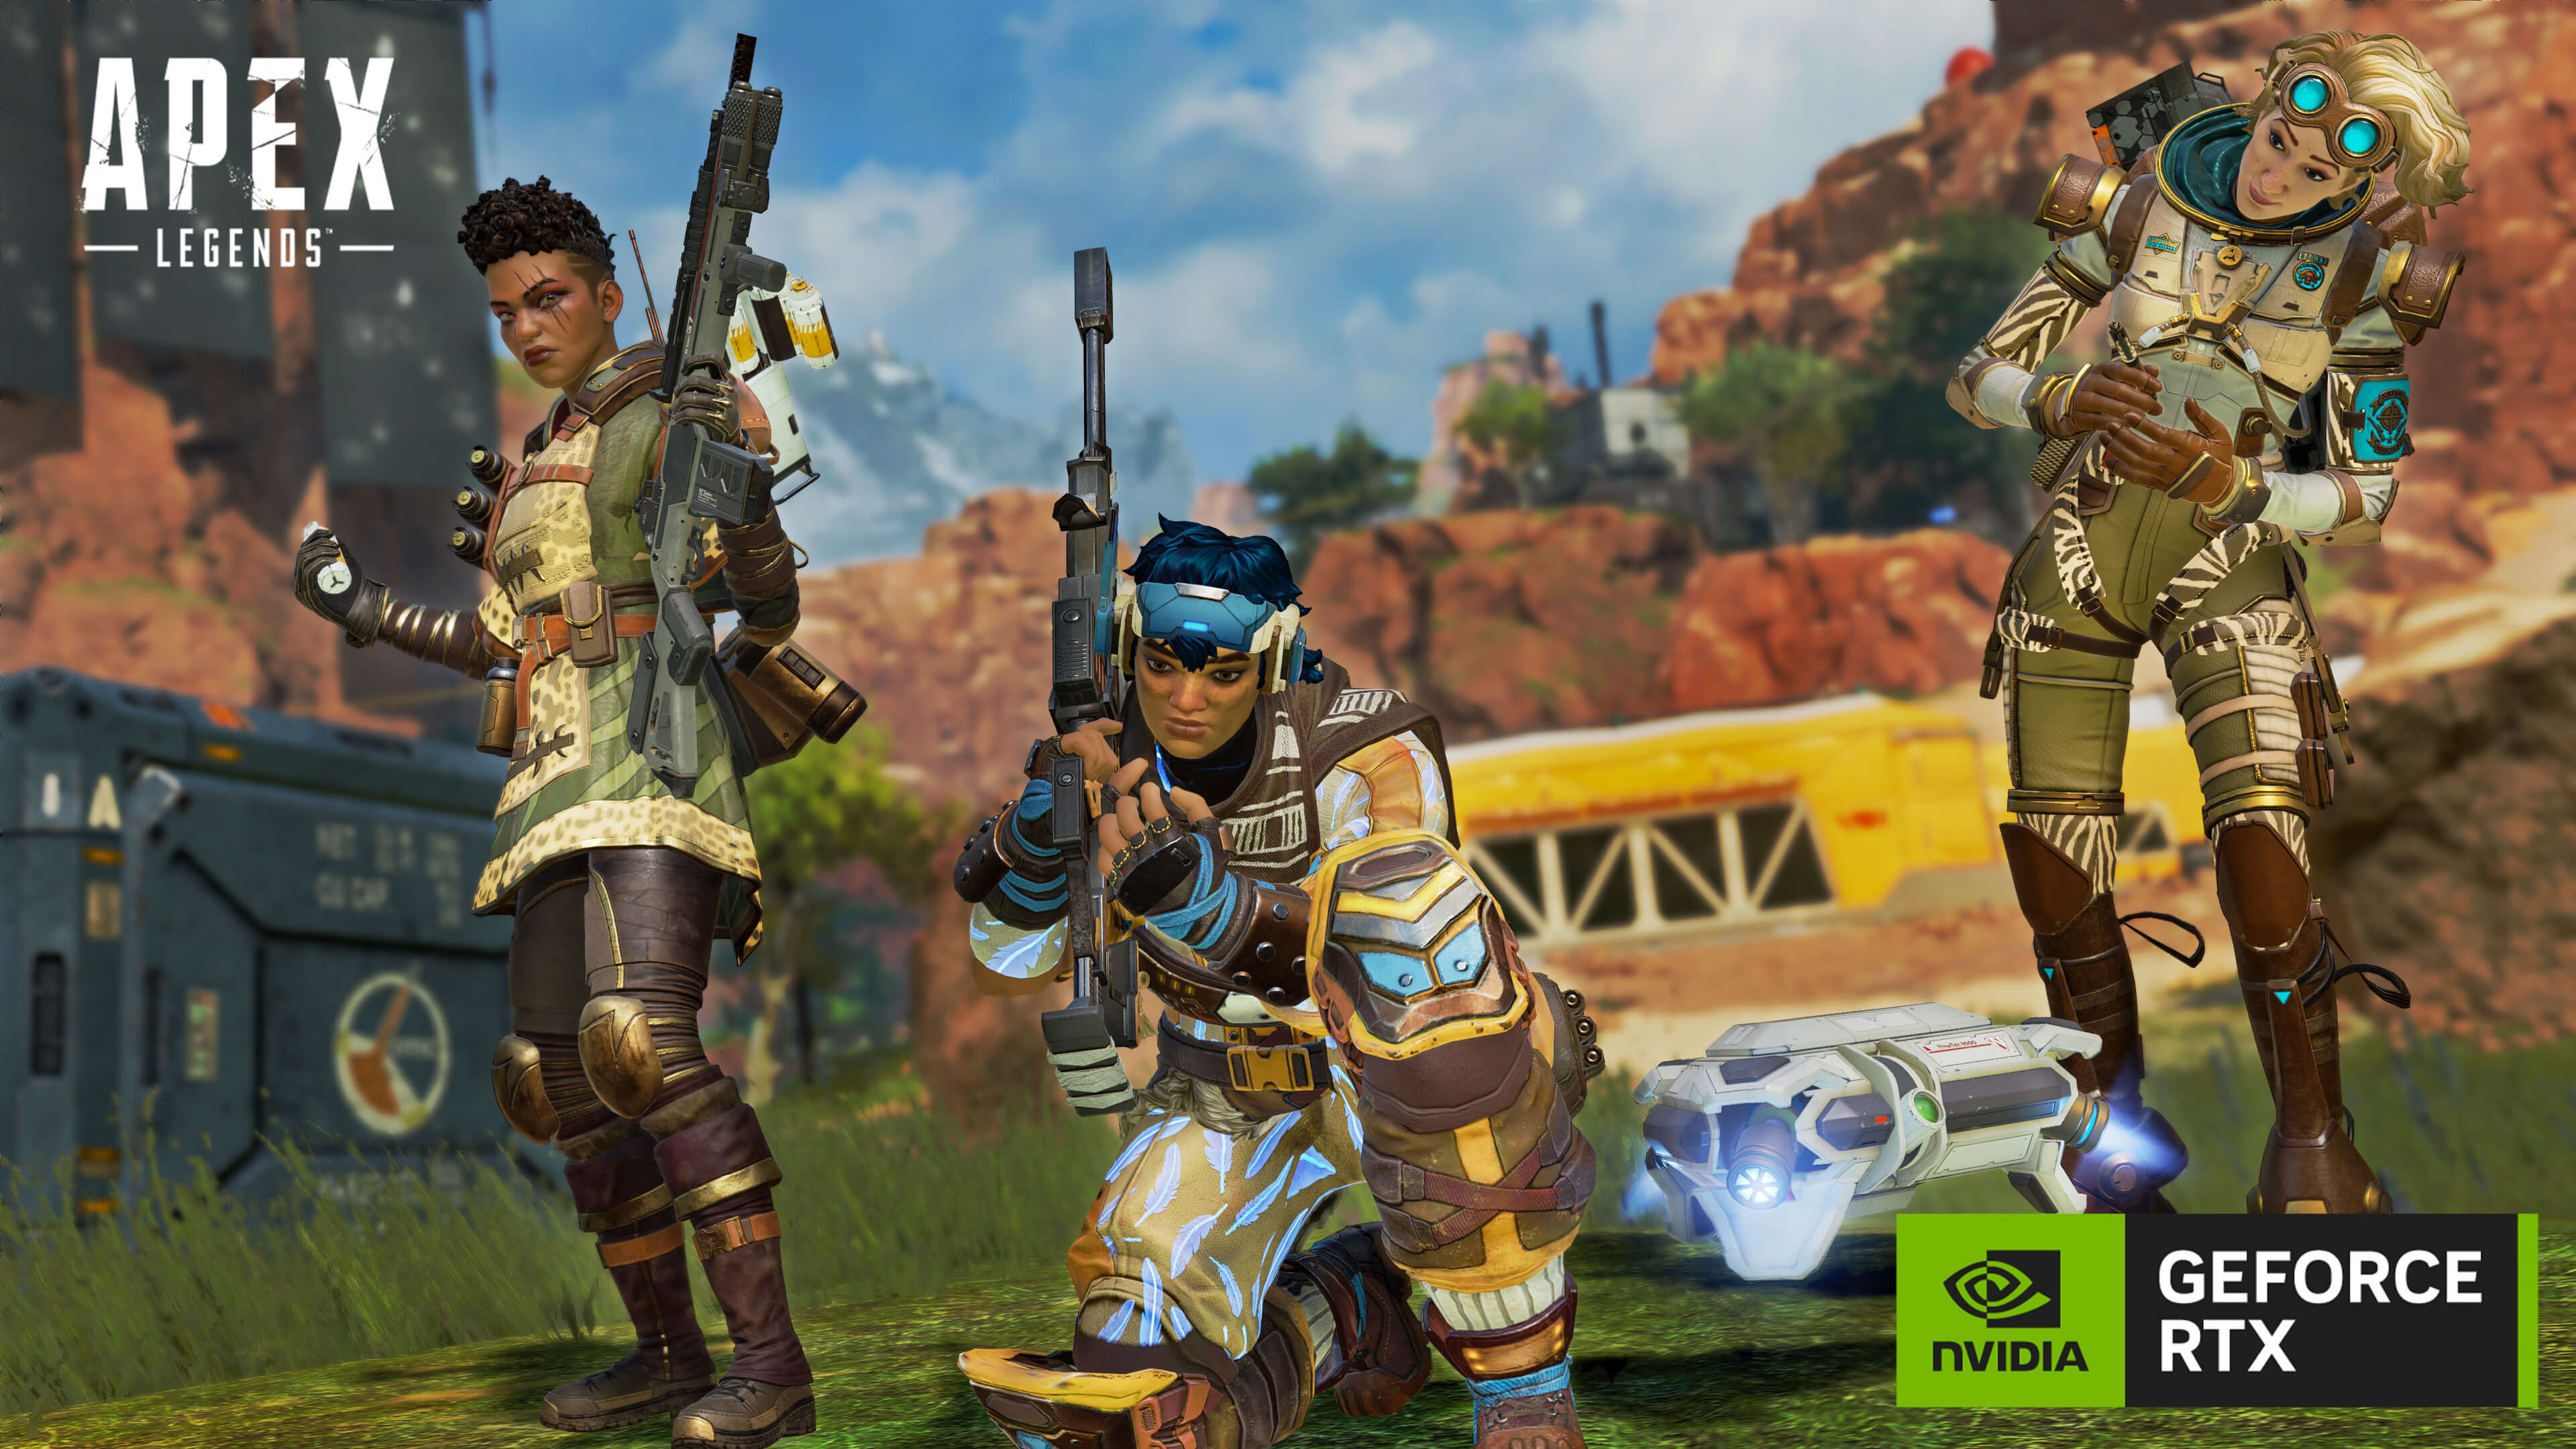 Footage of Apex Legends with NVIDIA logo